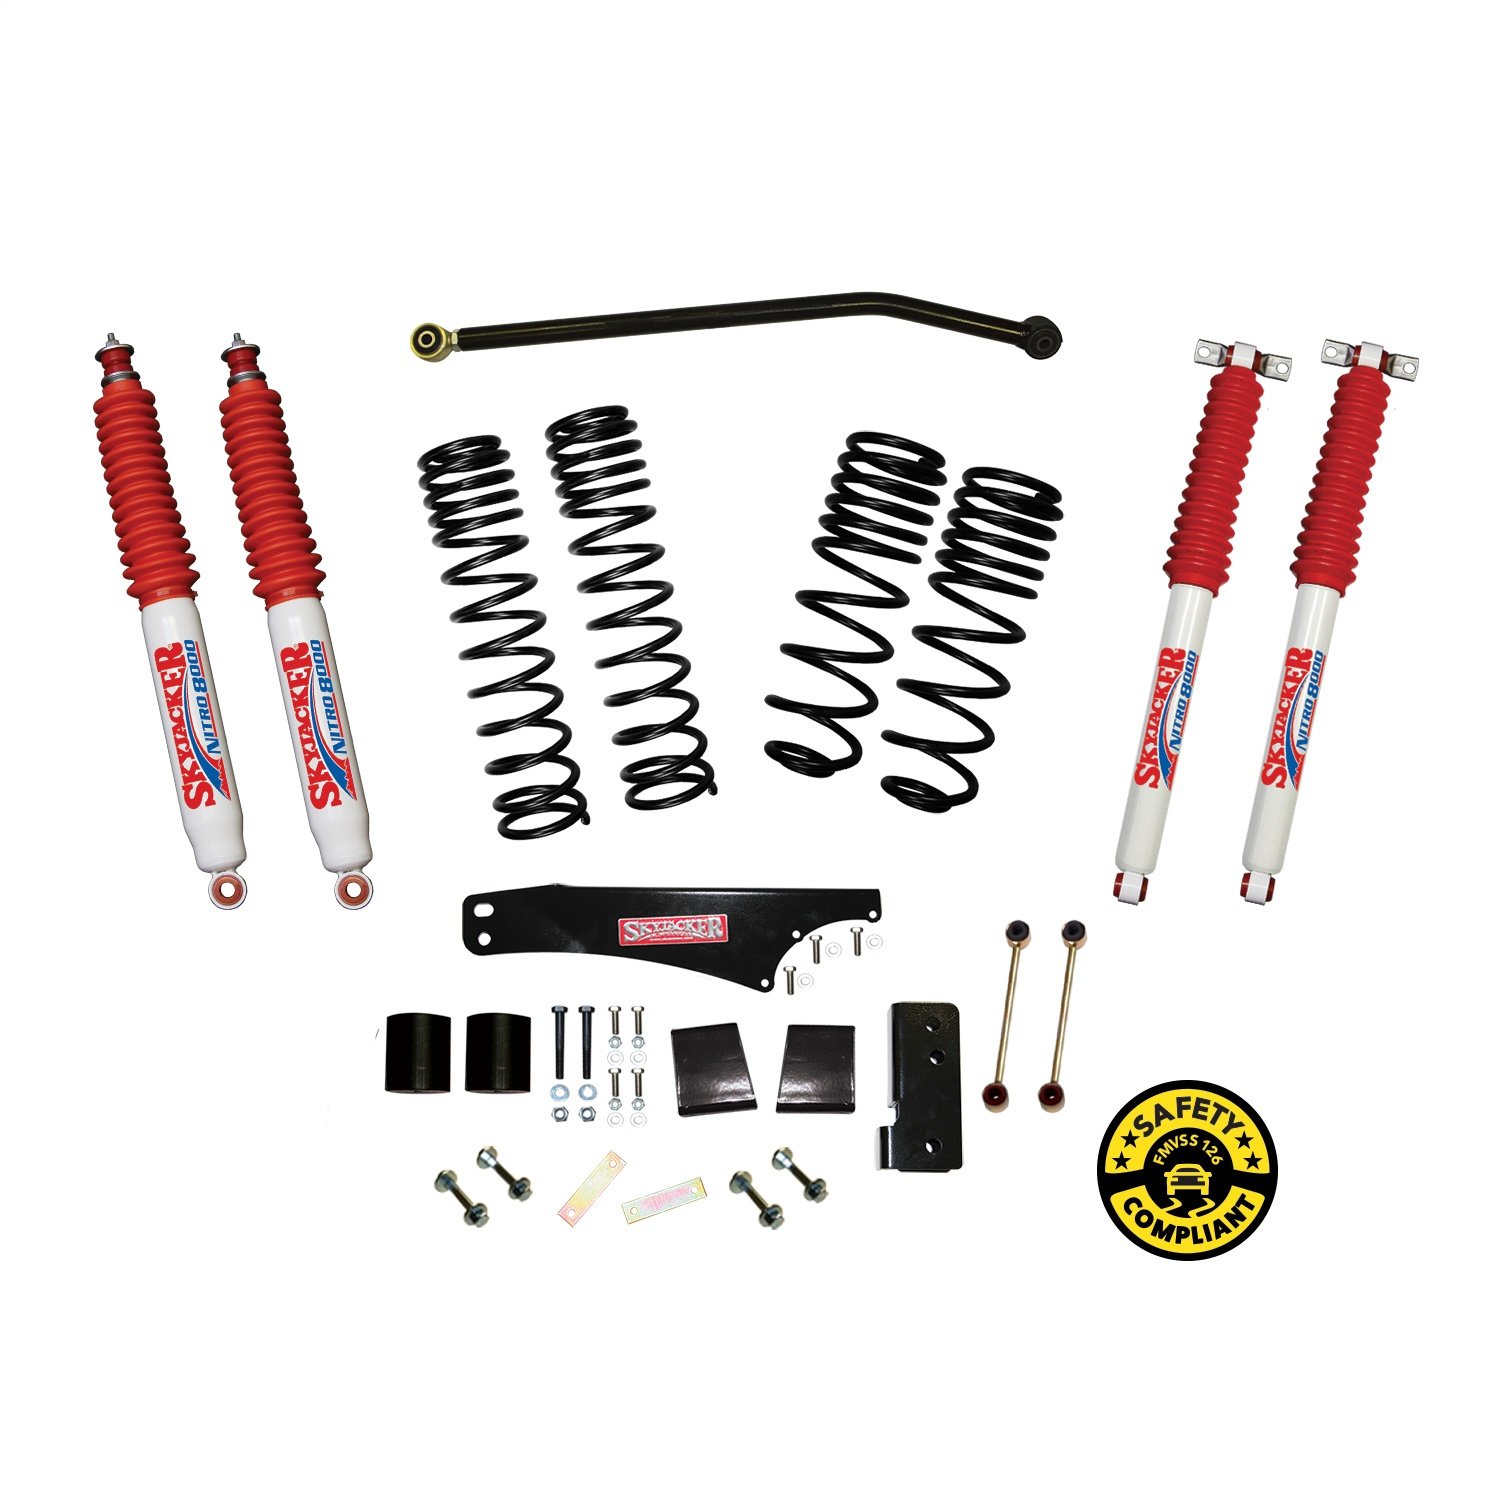 JK35BPNLT Front and Rear Suspension Lift Kit, Lift Amount: 4 in. Front/4 in. Rear